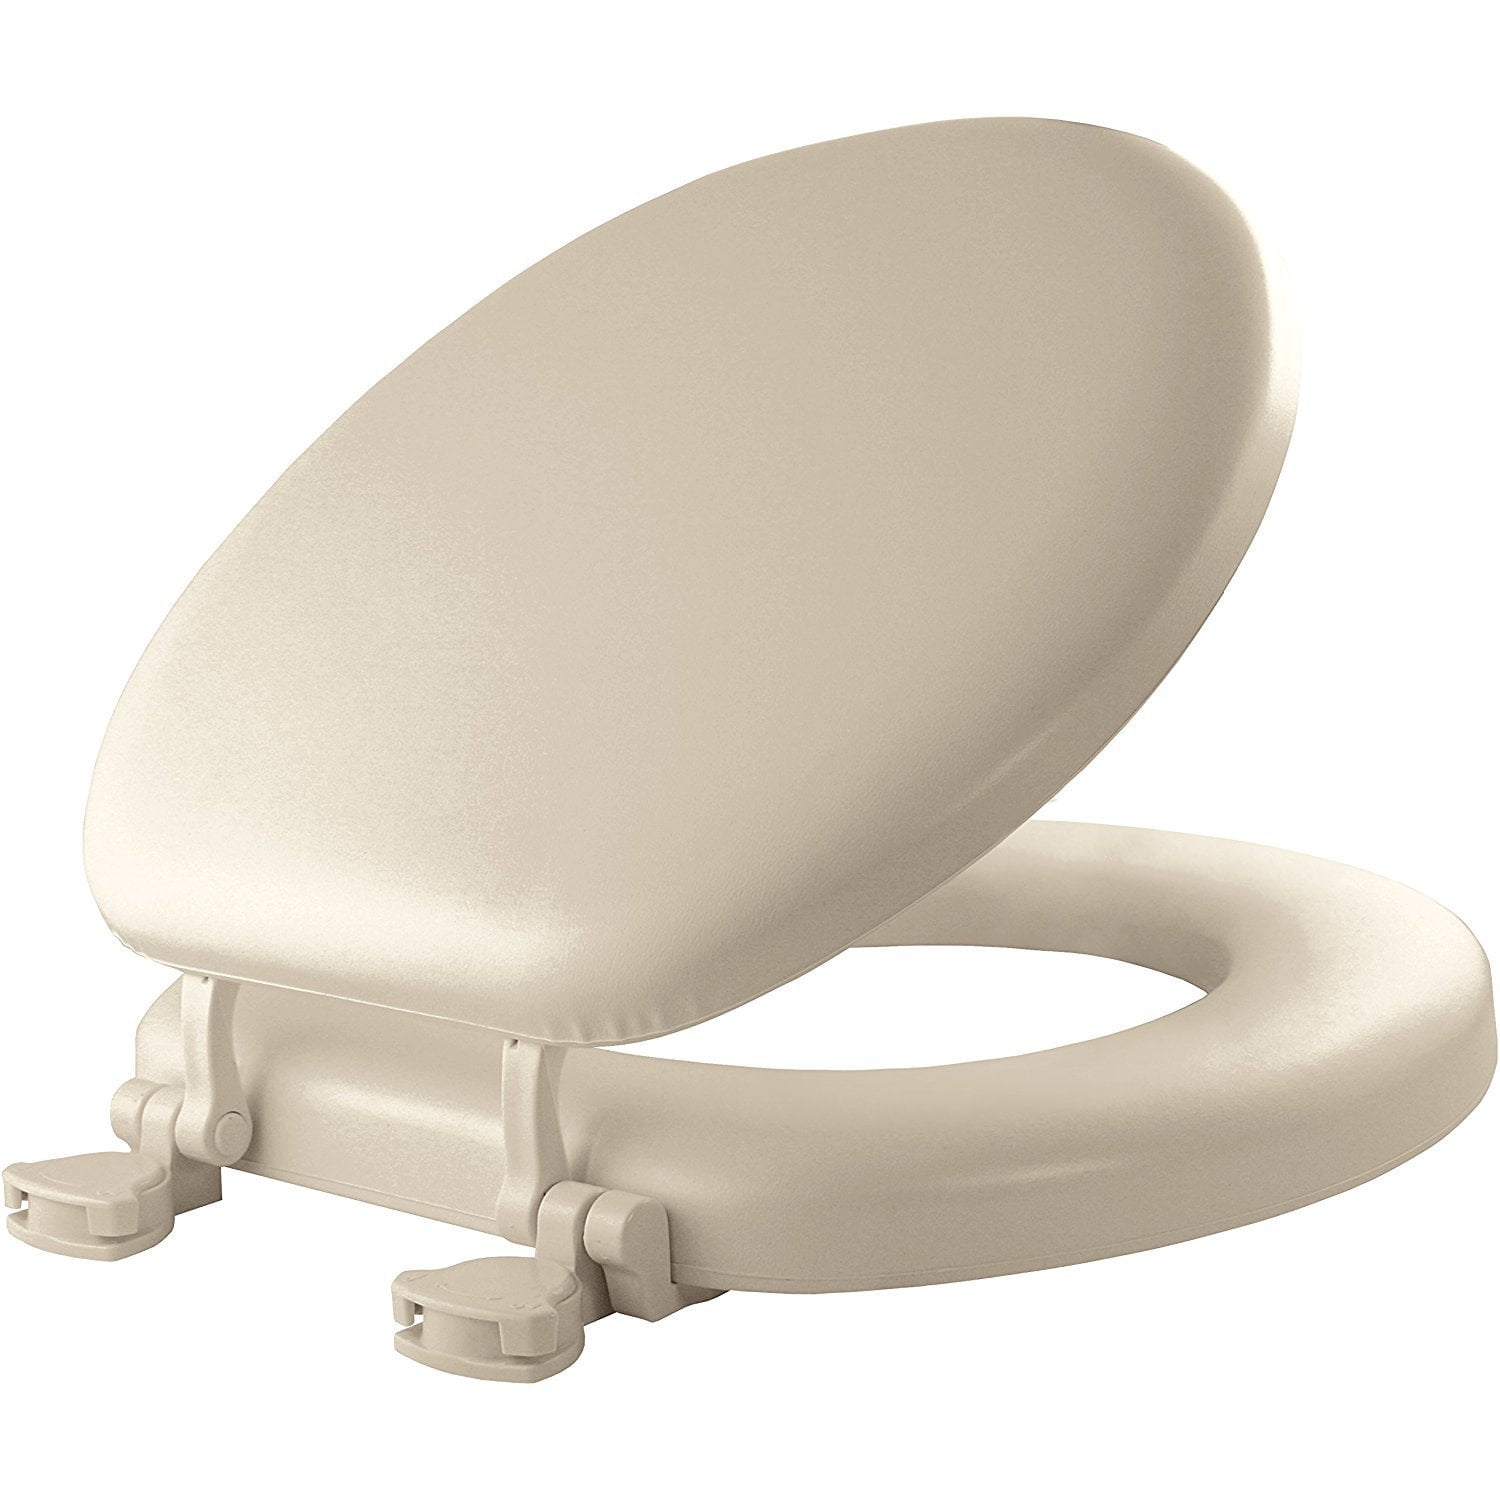 MAYFAIR  13EC 000 Soft Toilet Seat Easily Removes Padded with Wood Core, ROUND 